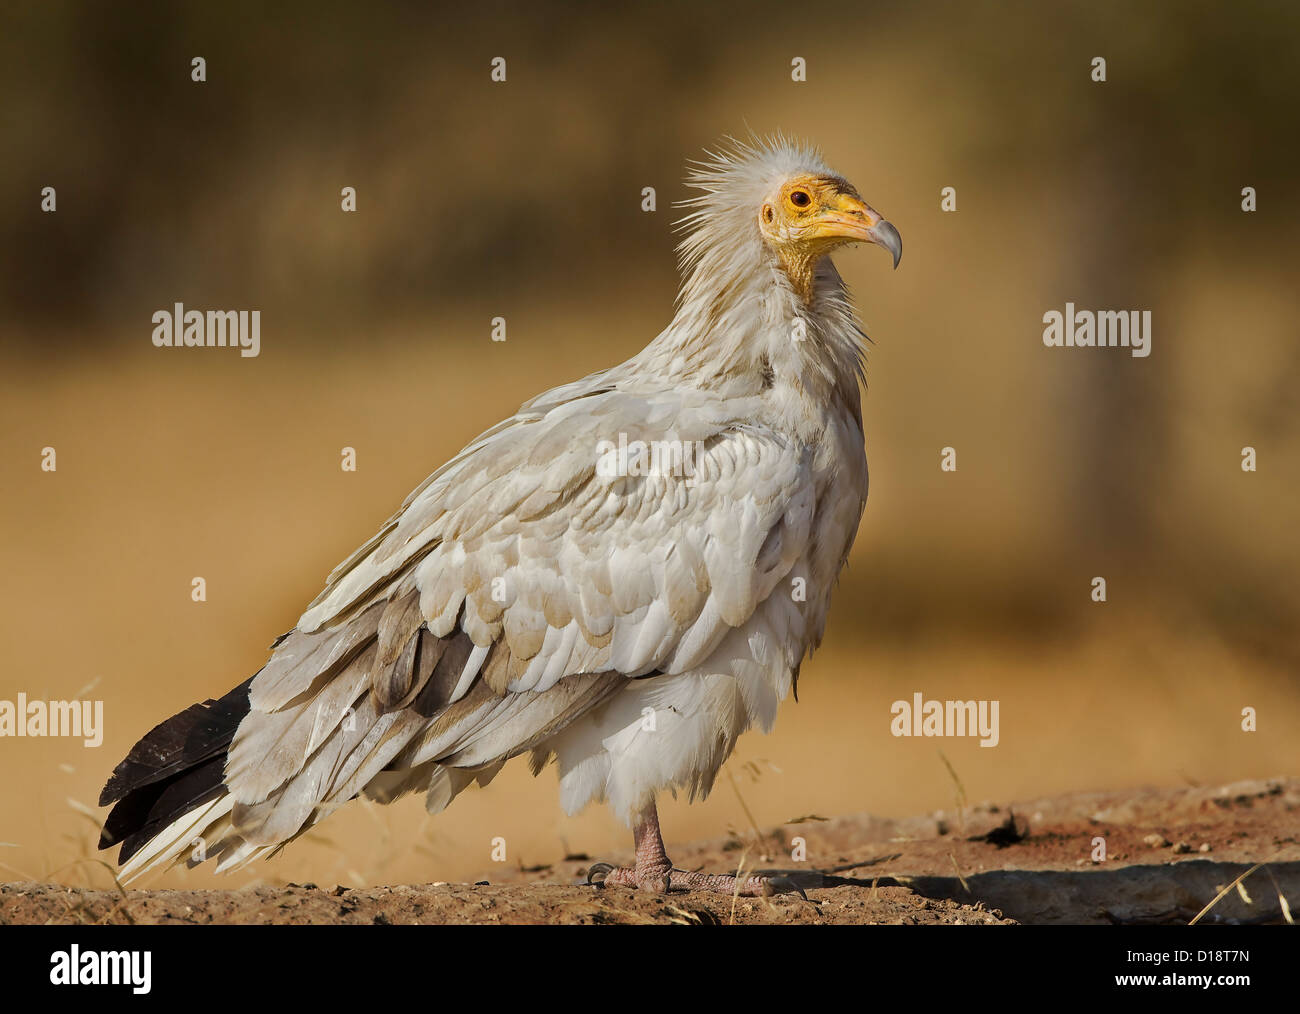 Egyptian Vulture (Neophron percnopterus), also called the White ...